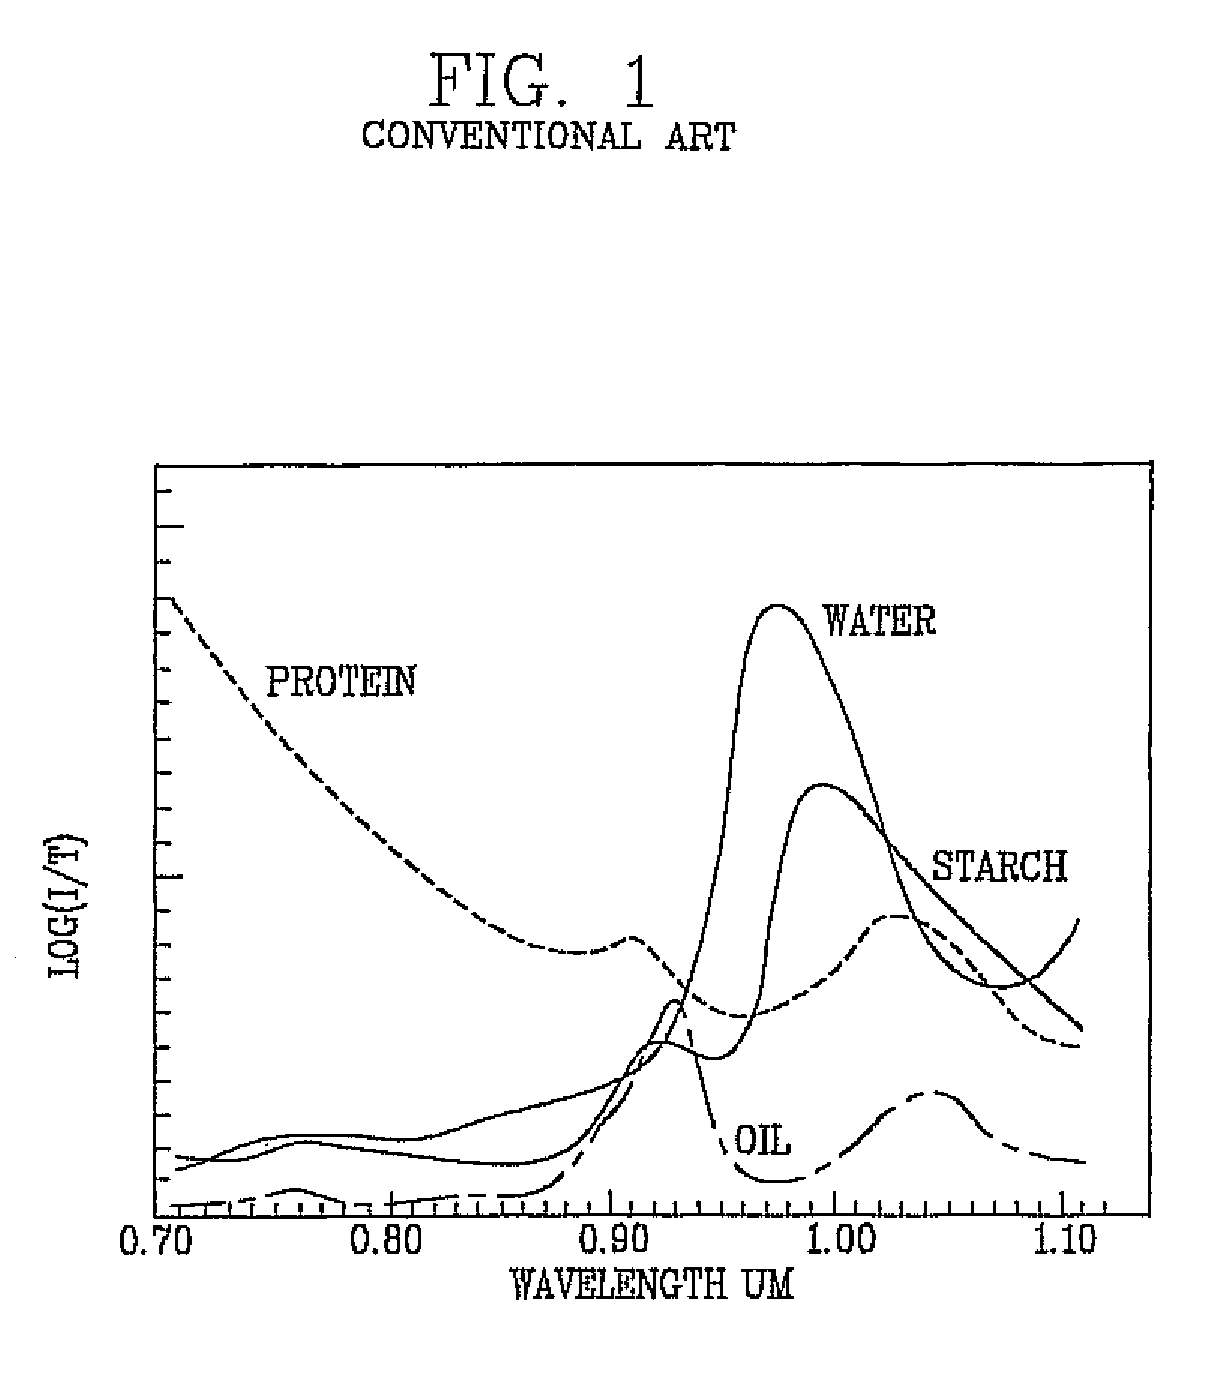 Apparatus and method for measuring biological information